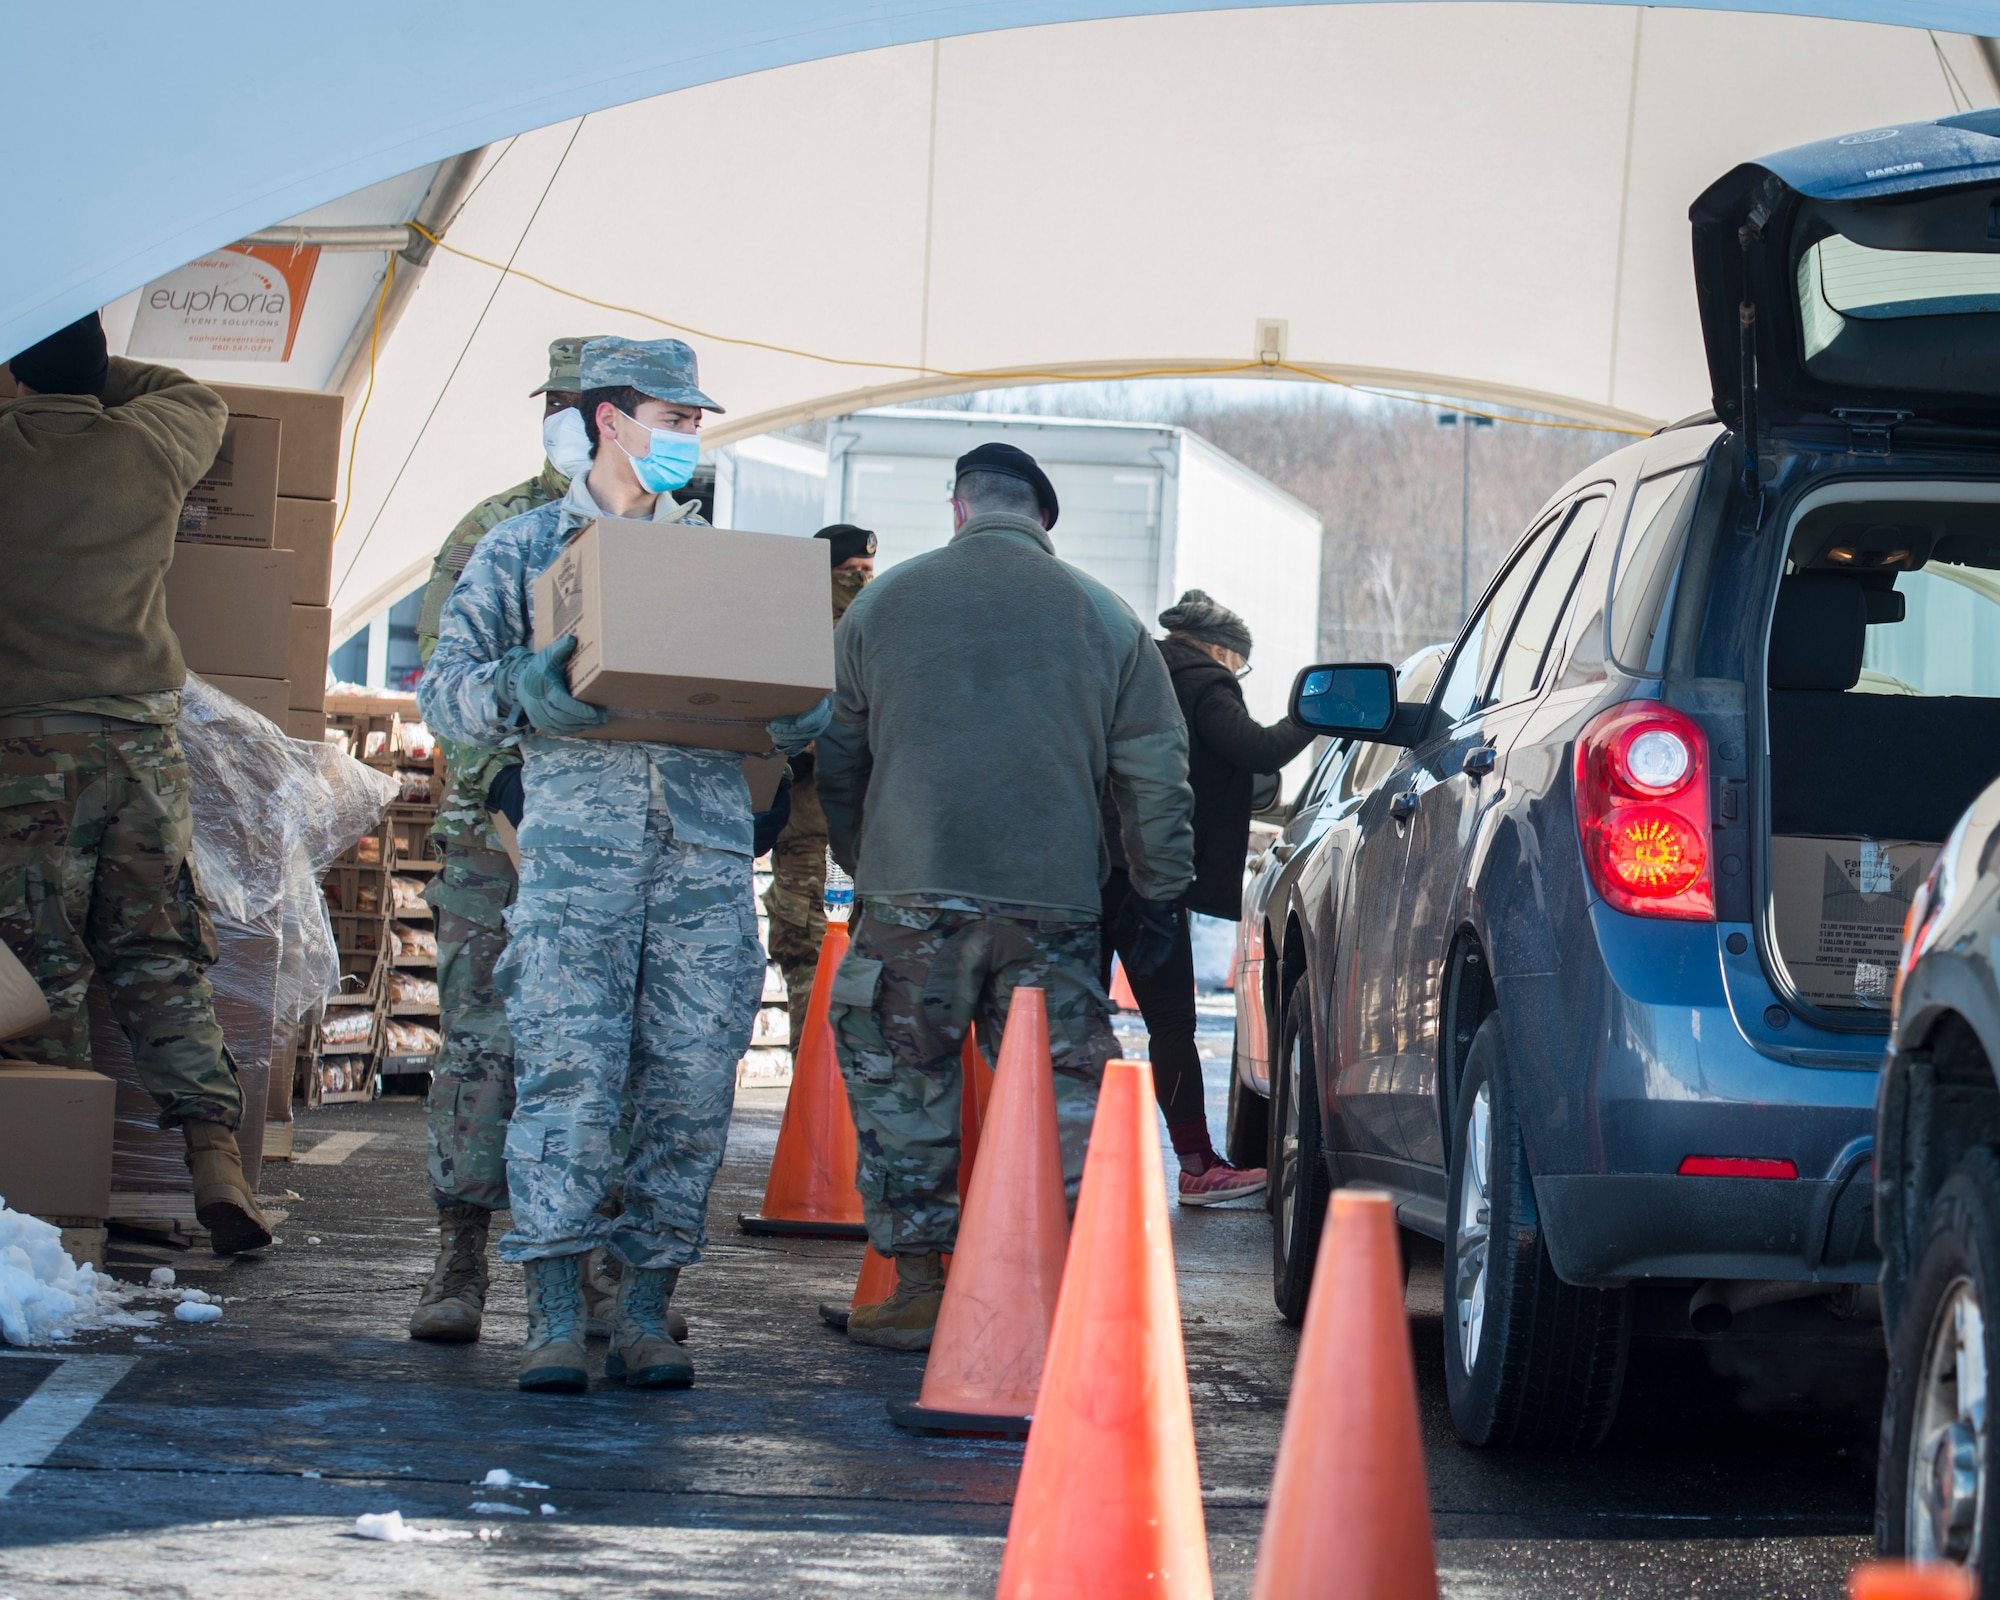 Airmen from the Connecticut National Guard’s 103rd Airlift Wing load U.S. Department of Agriculture Farmers to Families food boxes into vehicles at Rentschler Field in East Hartford, Connecticut, Feb. 4, 2021. Airmen are supporting logistics operations at Foodshare’s drive-thru emergency distribution site here, which has distributed over 8,000,000 pounds of food to 233,000 cars since April 20, 2020. (U.S. Air National Guard photo by Staff Sgt. Steven Tucker)